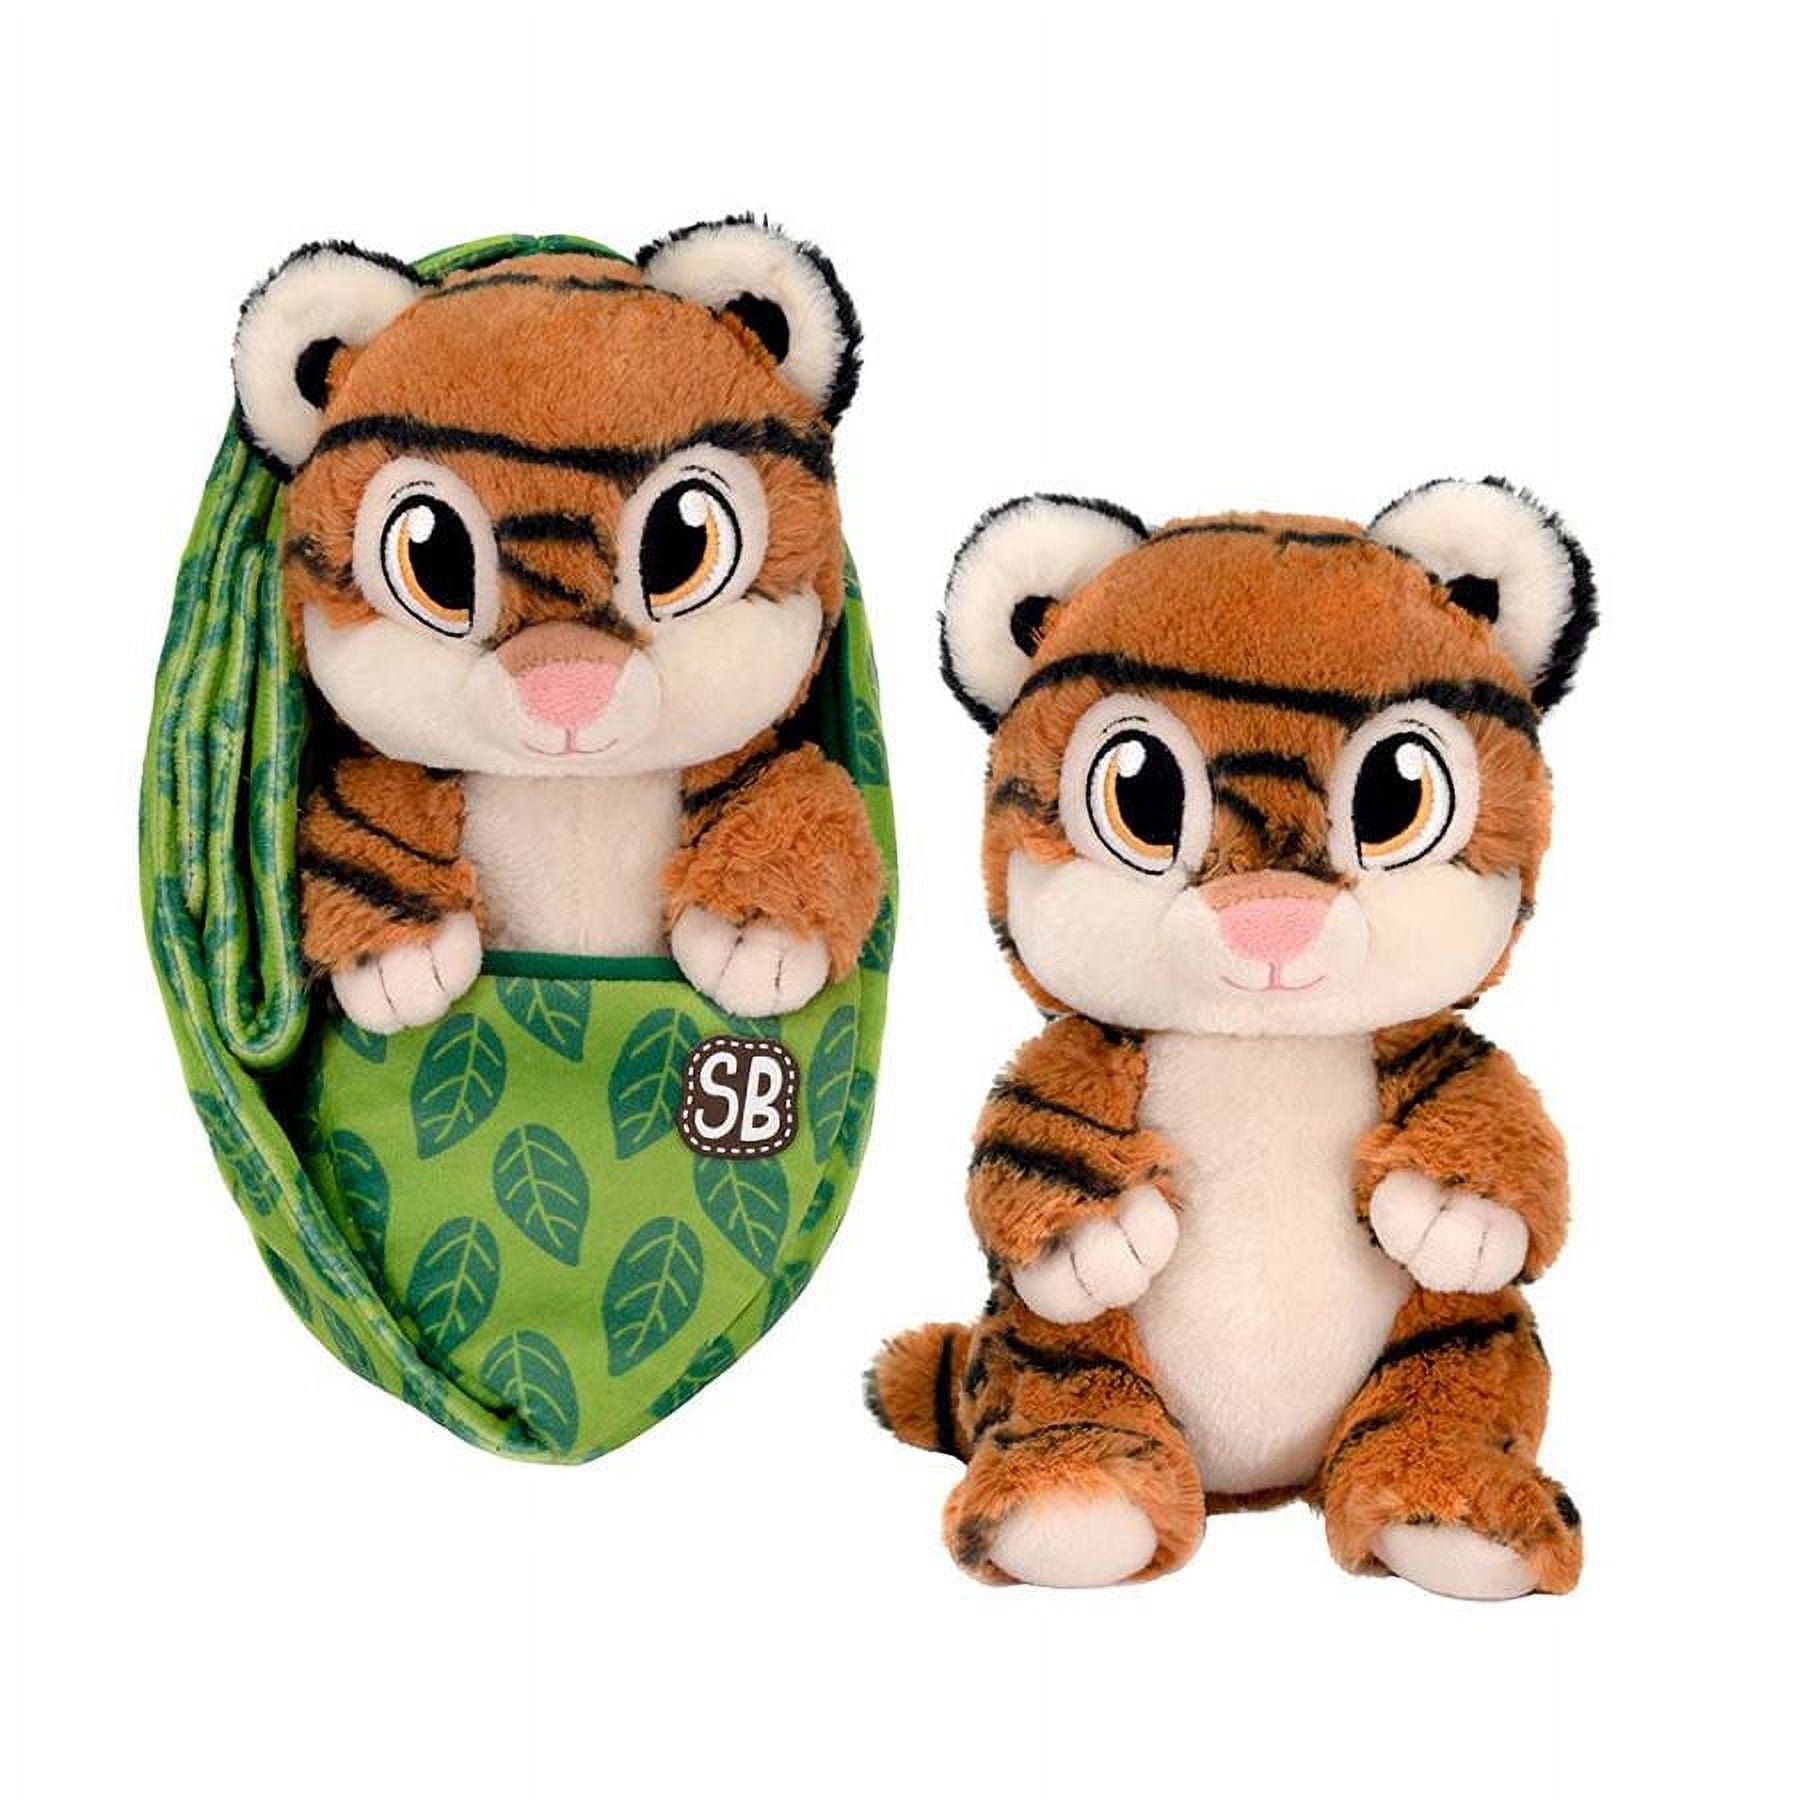 Tiger Swaddle Babies Plush Toy Baby Sling Carrier. NWT. Soft